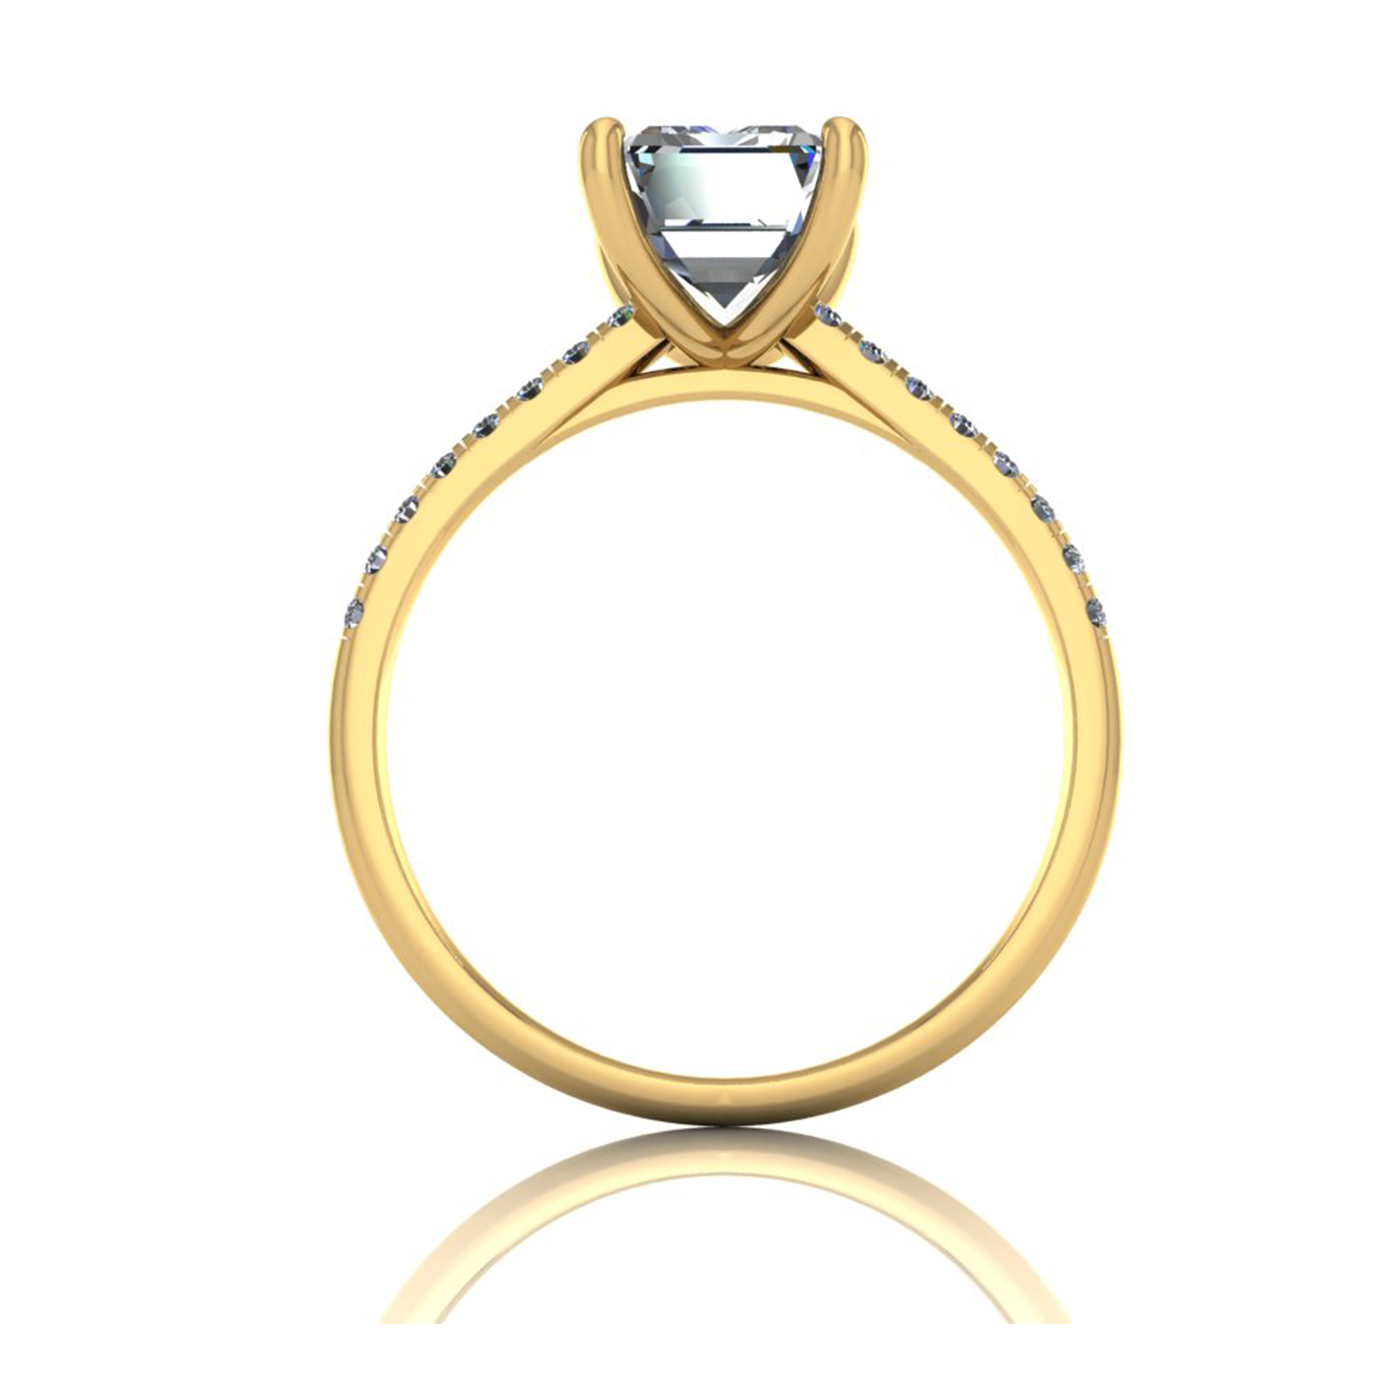 18k yellow gold 2.0ct 4 prongs emerald cut diamond engagement ring with whisper thin pavÉ set band